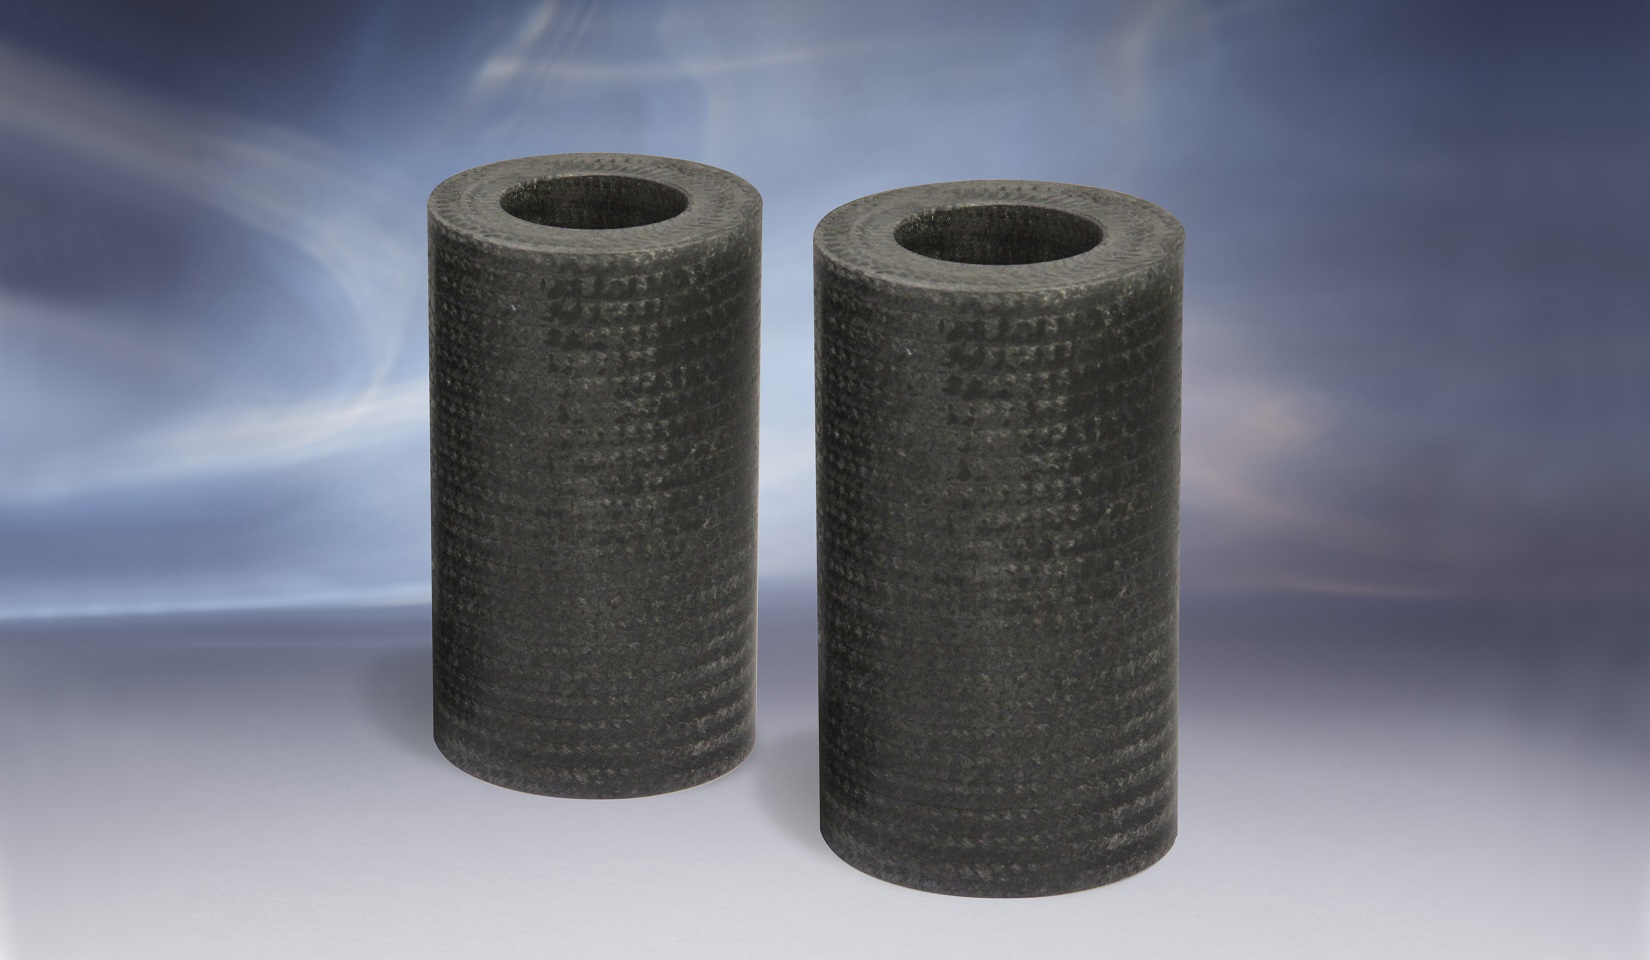 Greene Tweed has developed a carbon fiber perfluoroalkoxy (PFA) composite which could replace metallic wear parts in centrifugal pumps.